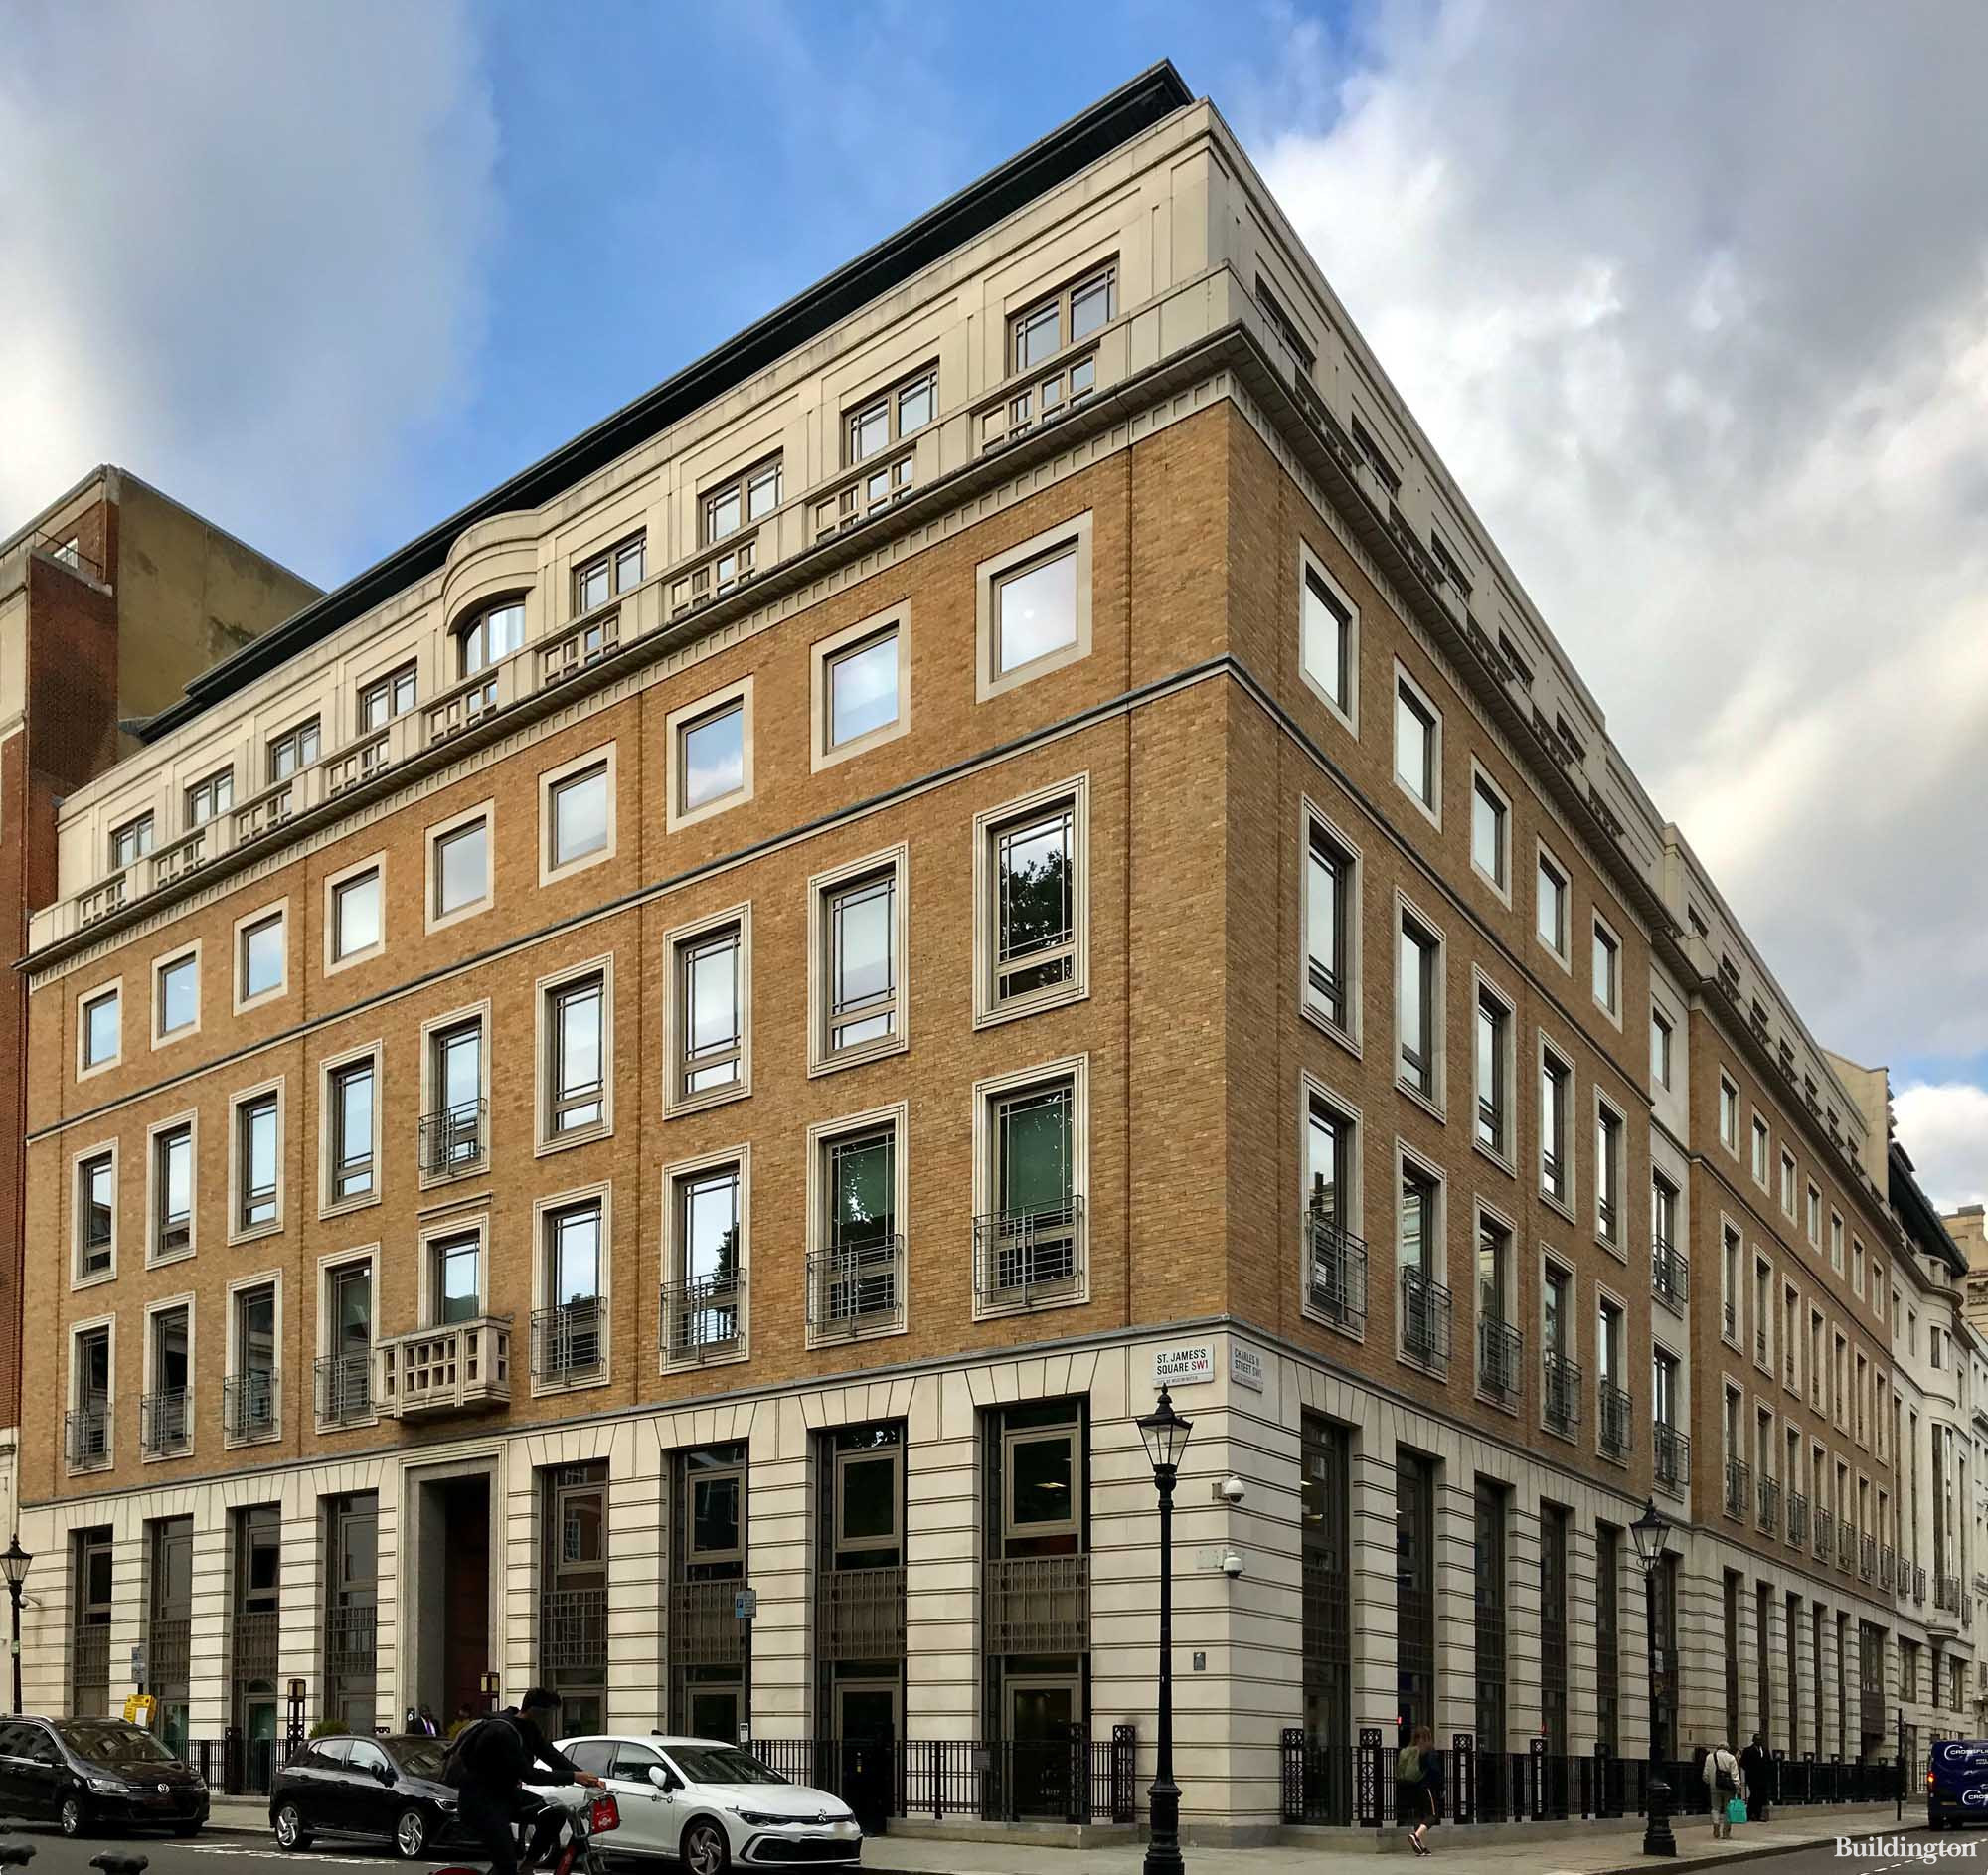 1 St James's Square office building on the corner of Charles II Street in St James's, London SW1.